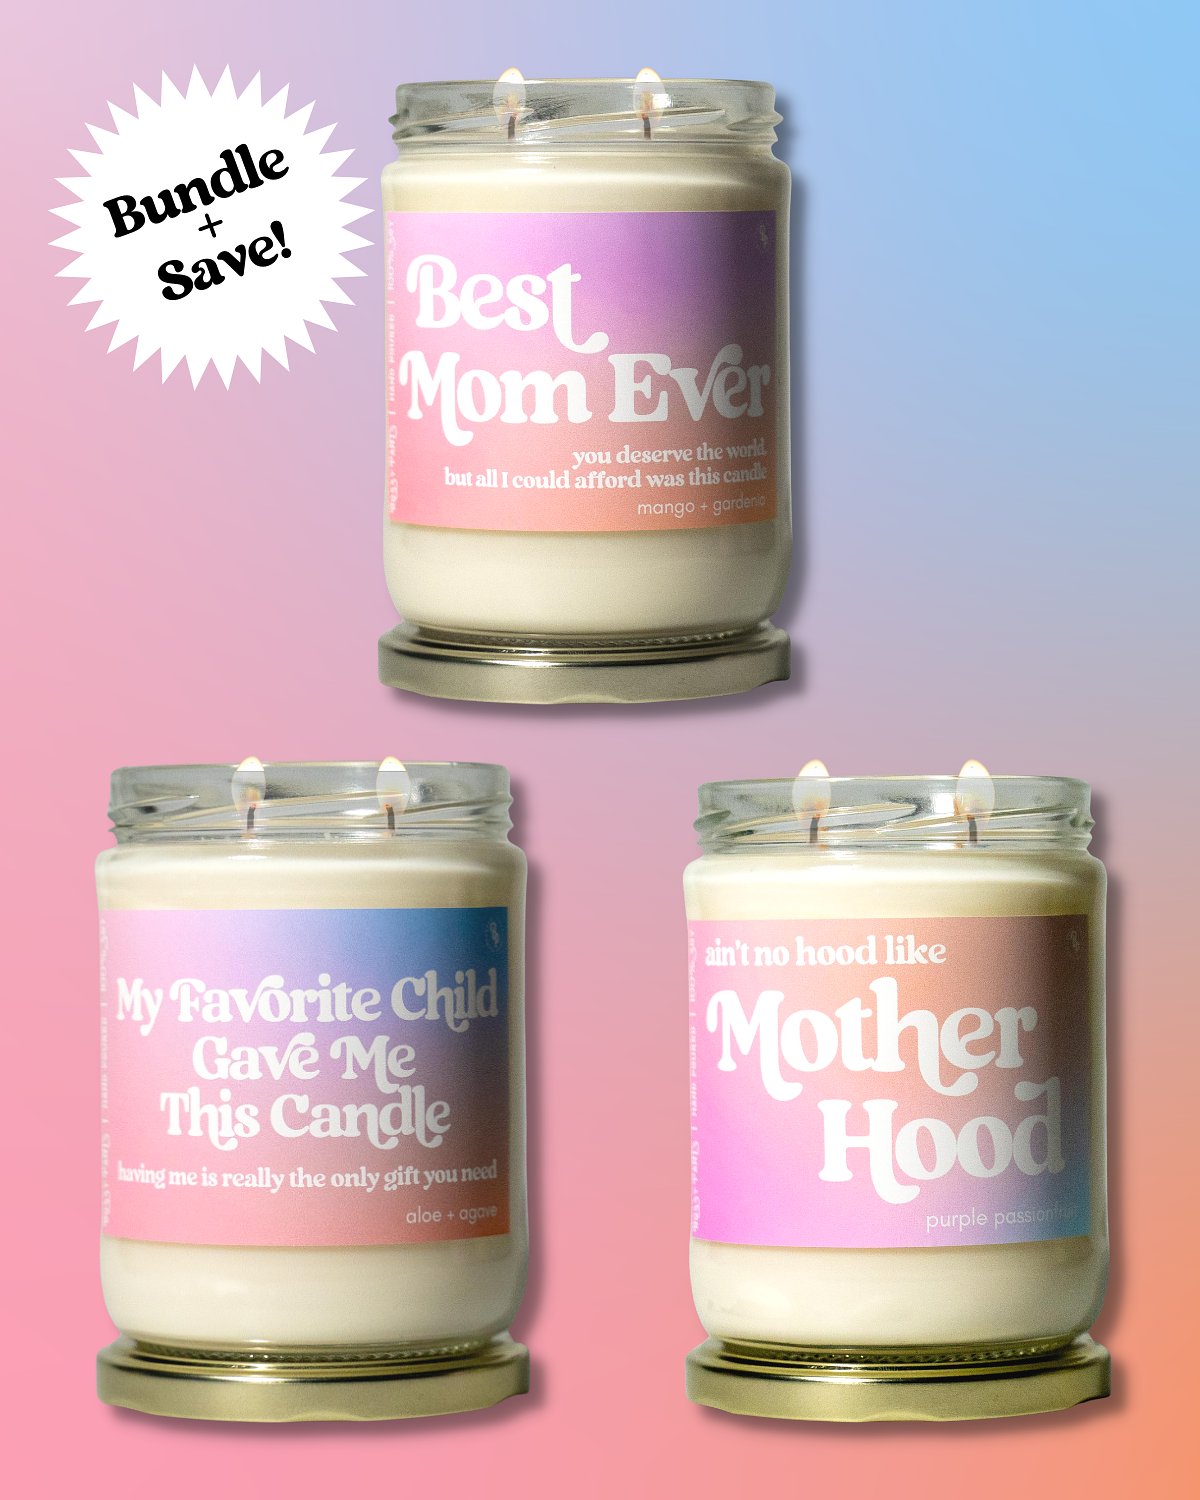 Candles - Having Me As A Son Is The Only Mother's Day Gift You